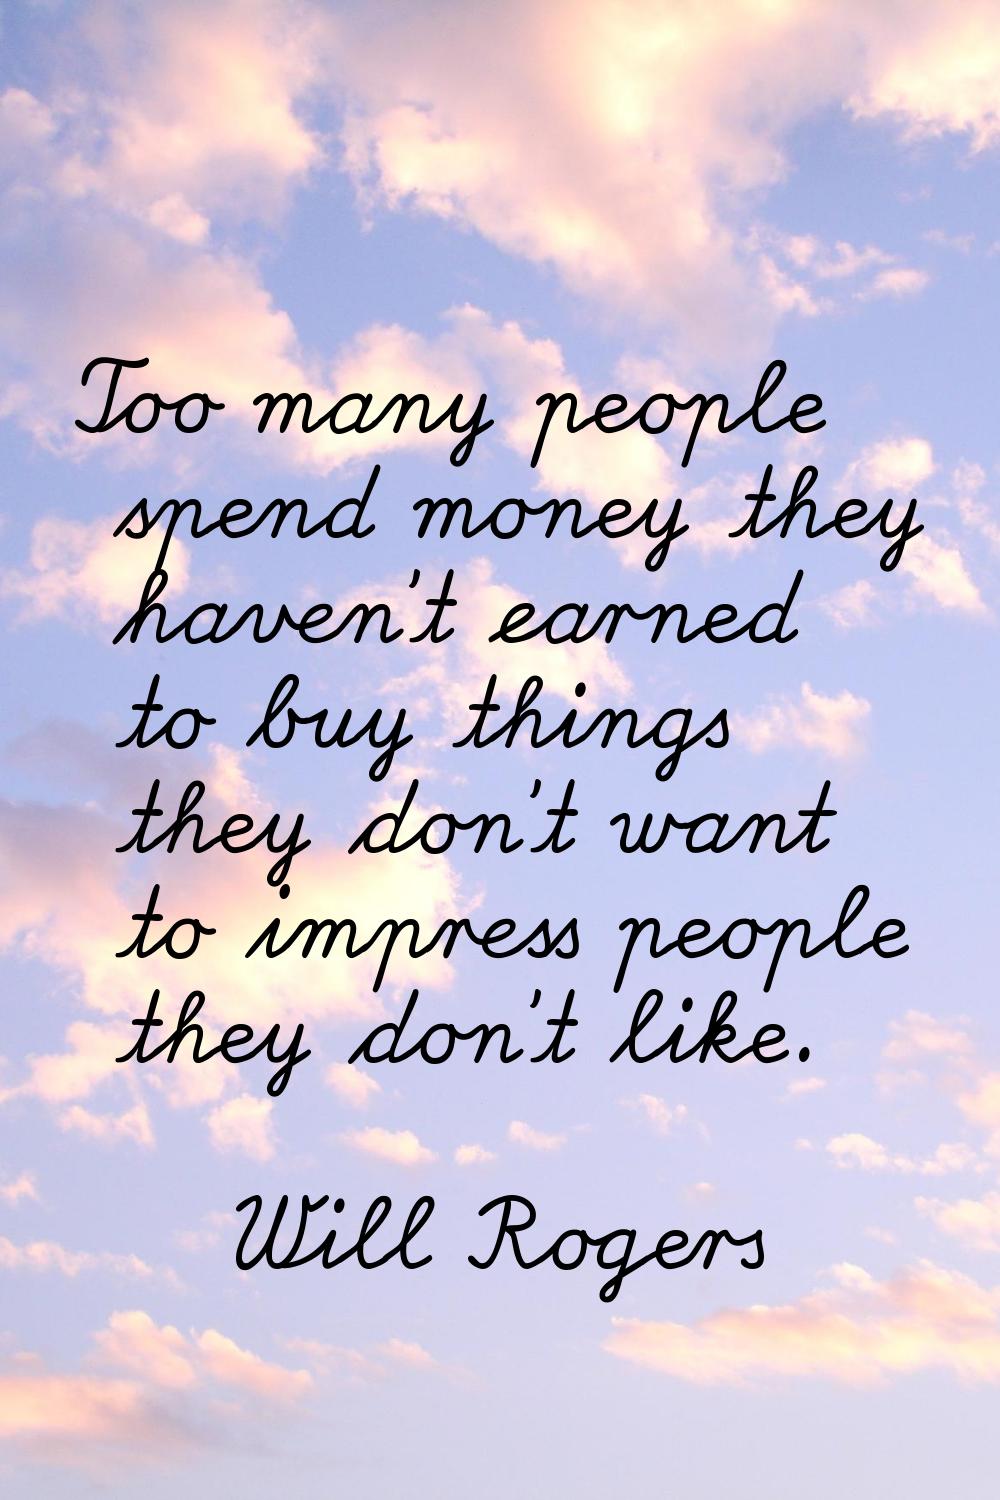 Too many people spend money they haven't earned to buy things they don't want to impress people the